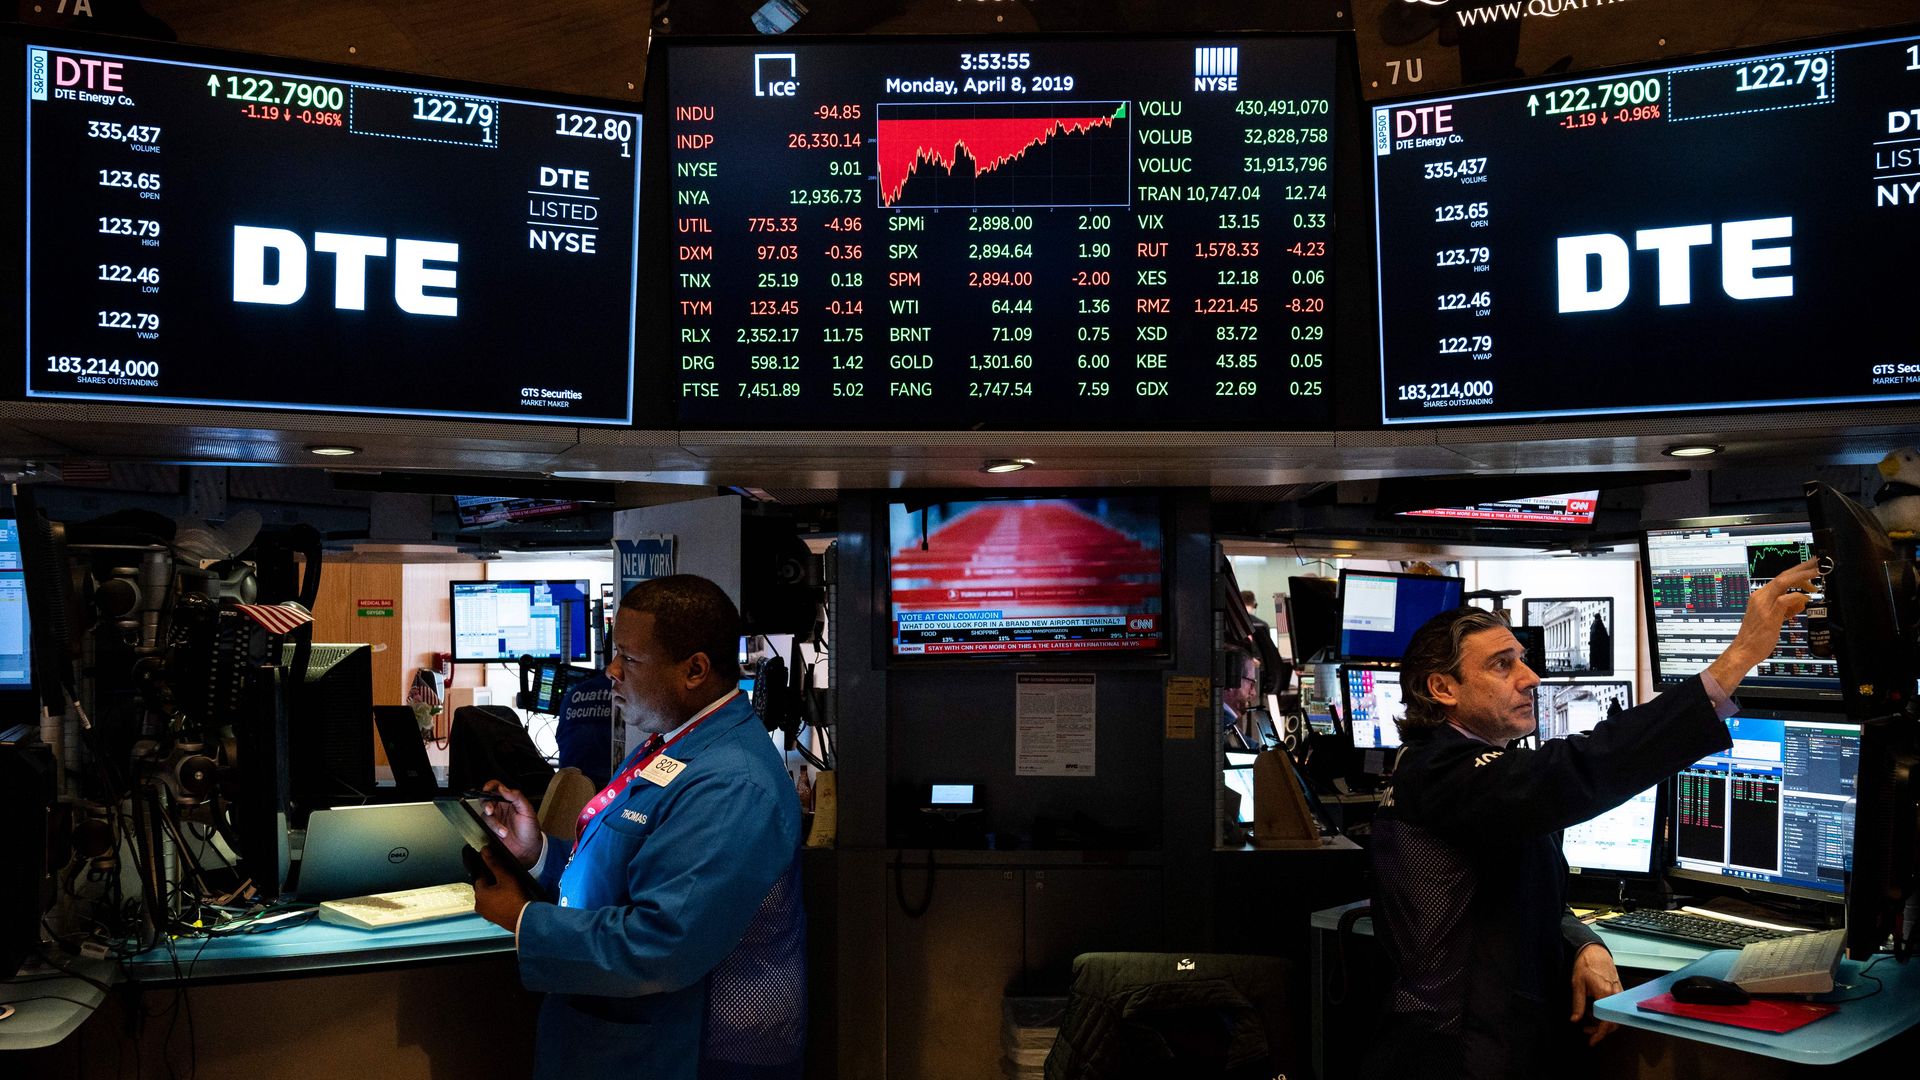 In this image, two men stand facing away from each other on the stock market trading floor, with three screens above and behind them.